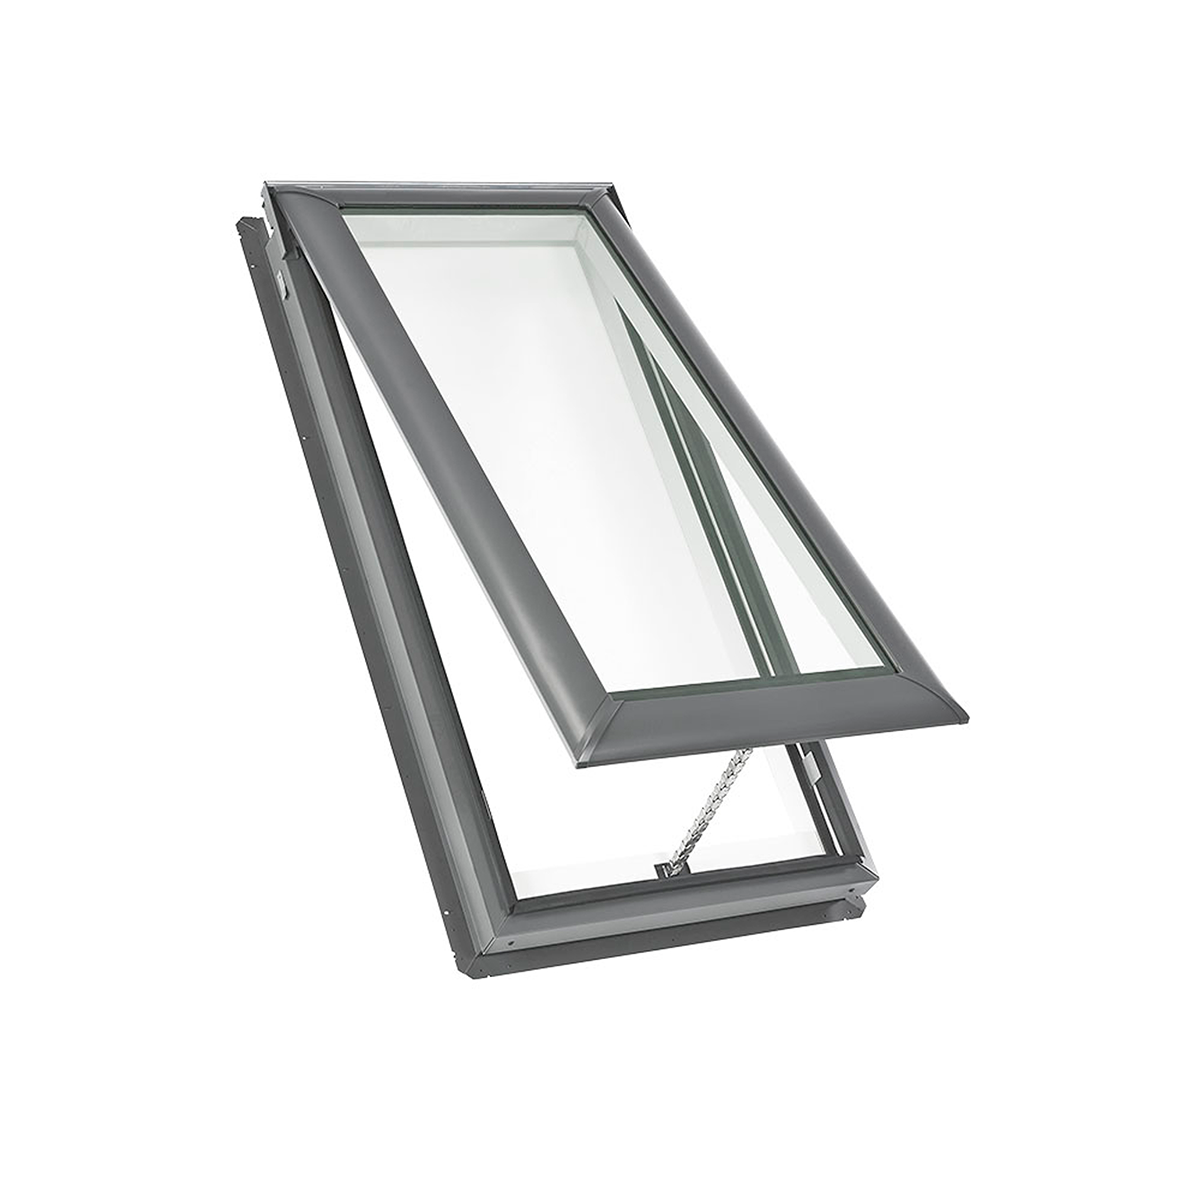 Manual Deck-Mount Skylight with Laminated Low-E3 Glass - 21 in. x 45-3/4 in. - VS C06